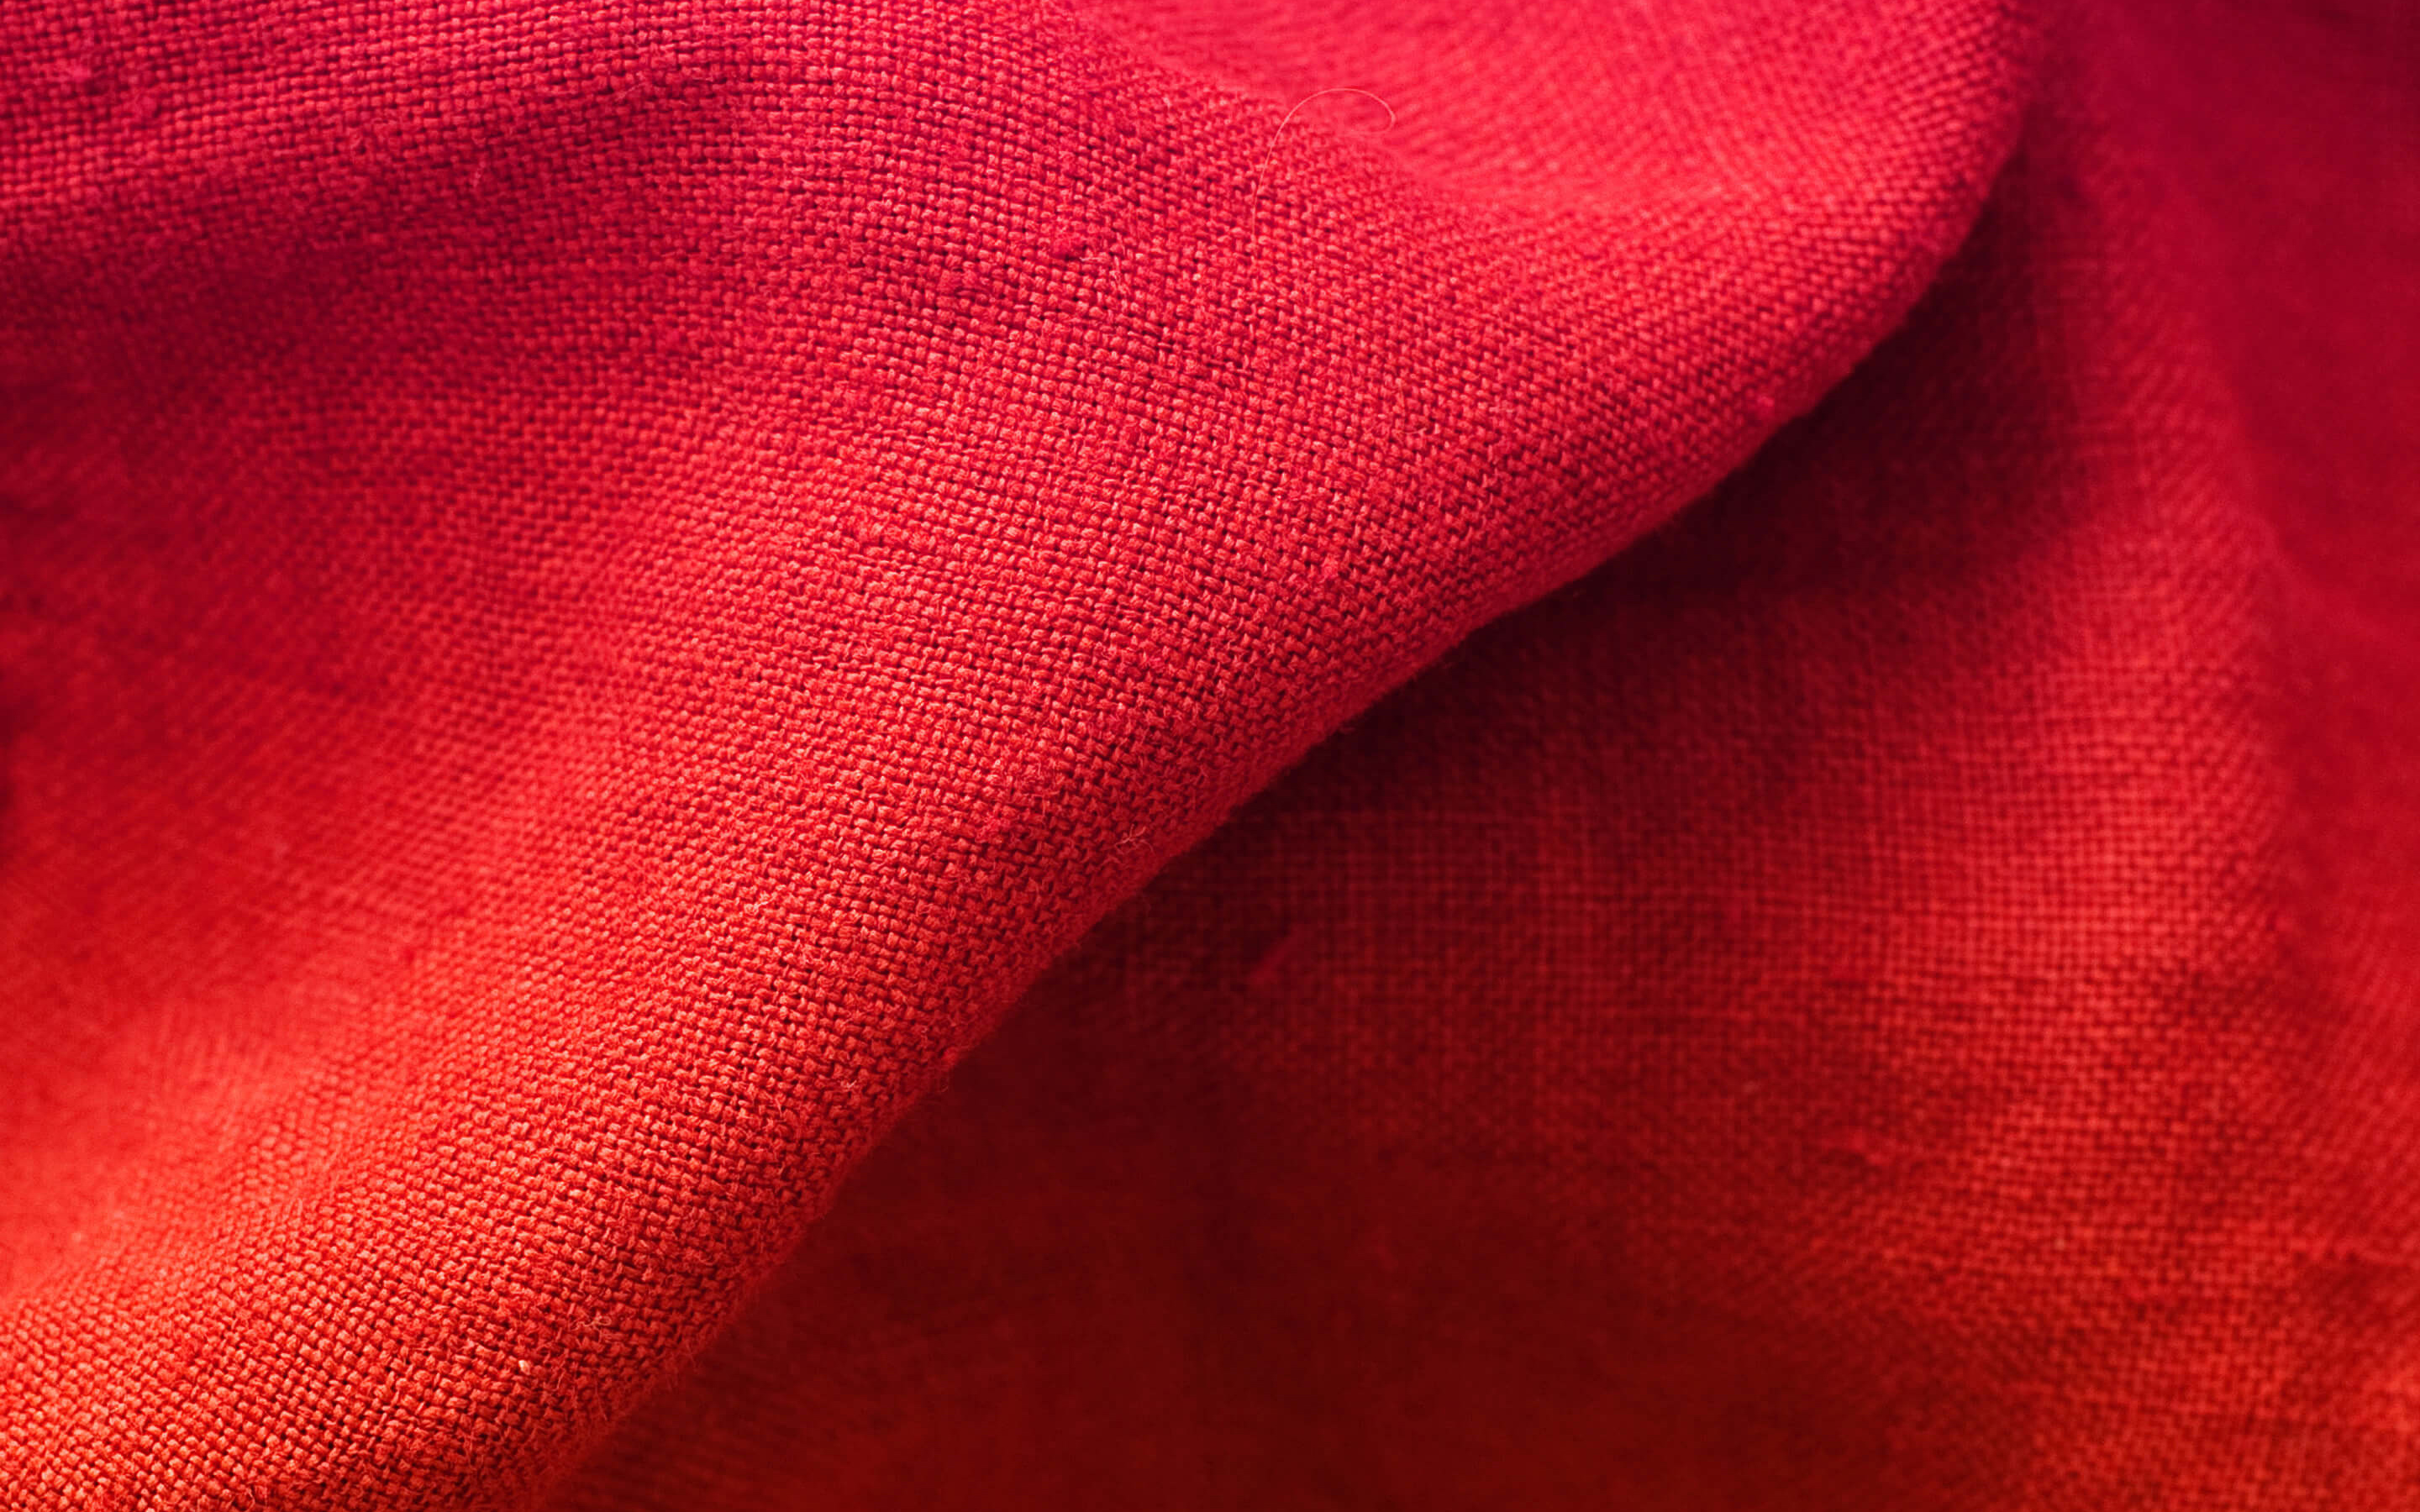 Red Fabric